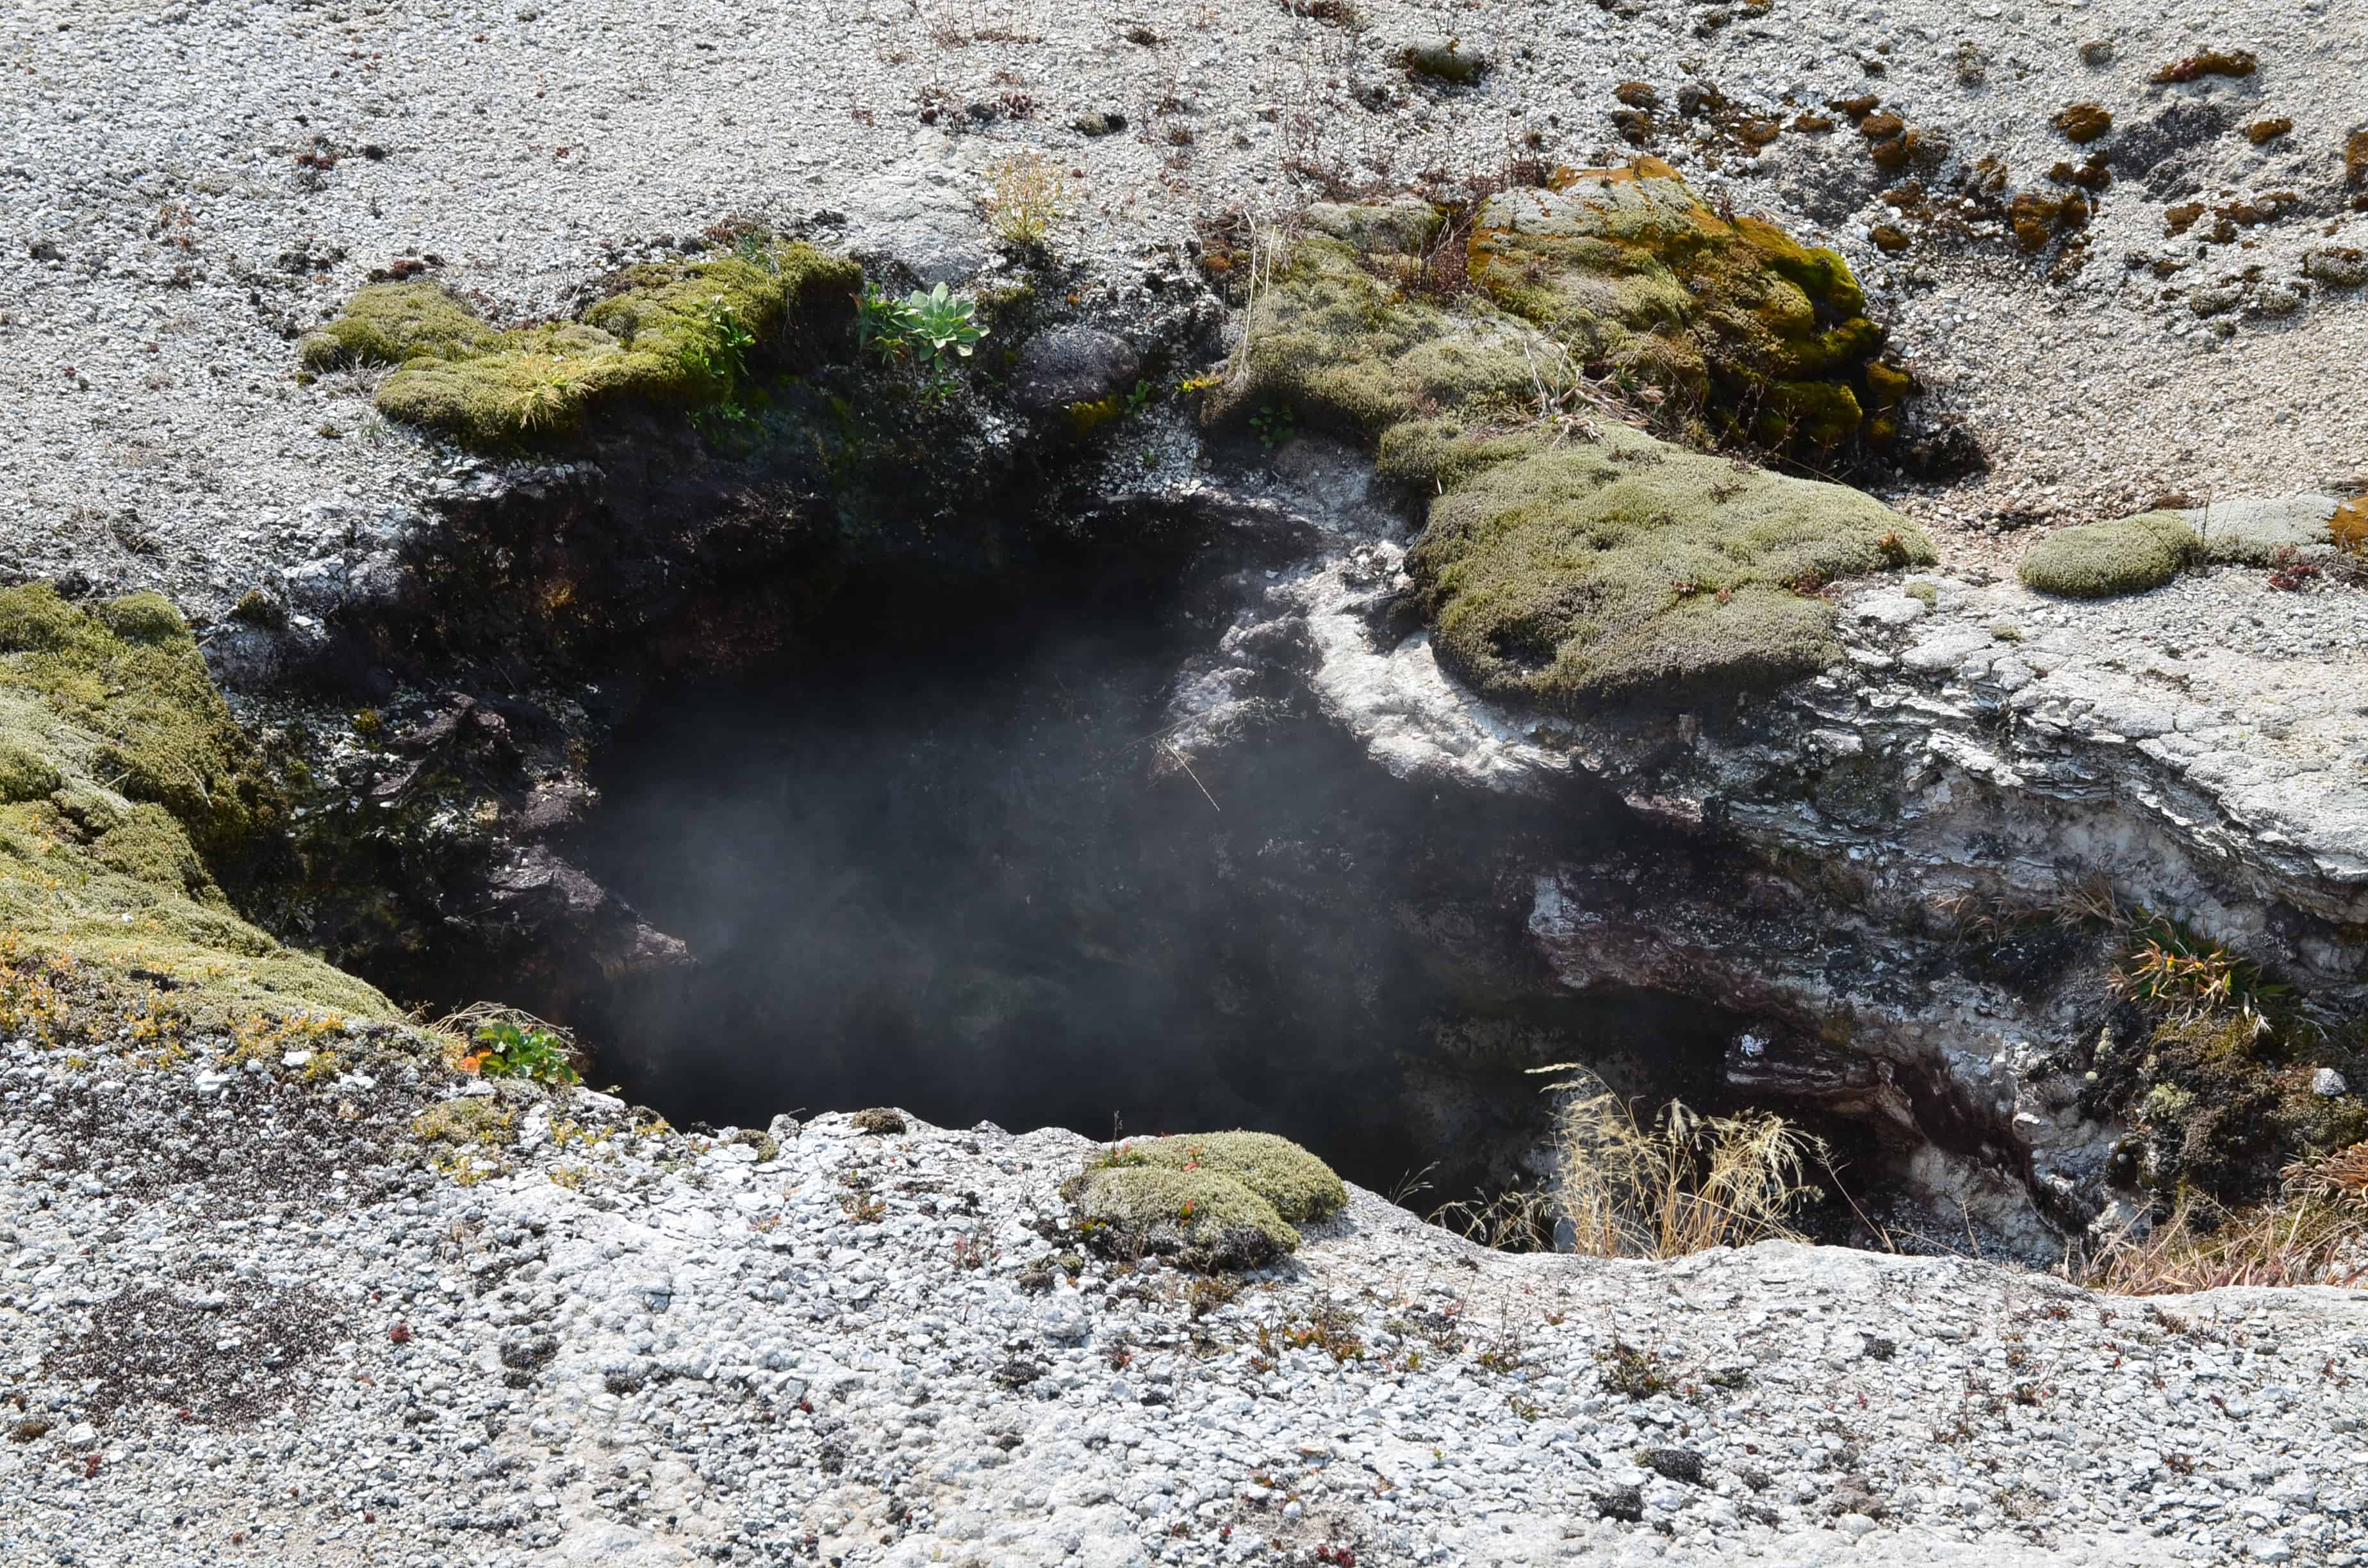 Black Pearl Geyser at Biscuit Basin at the Upper Geyser Basin at Yellowstone National Park, Wyoming